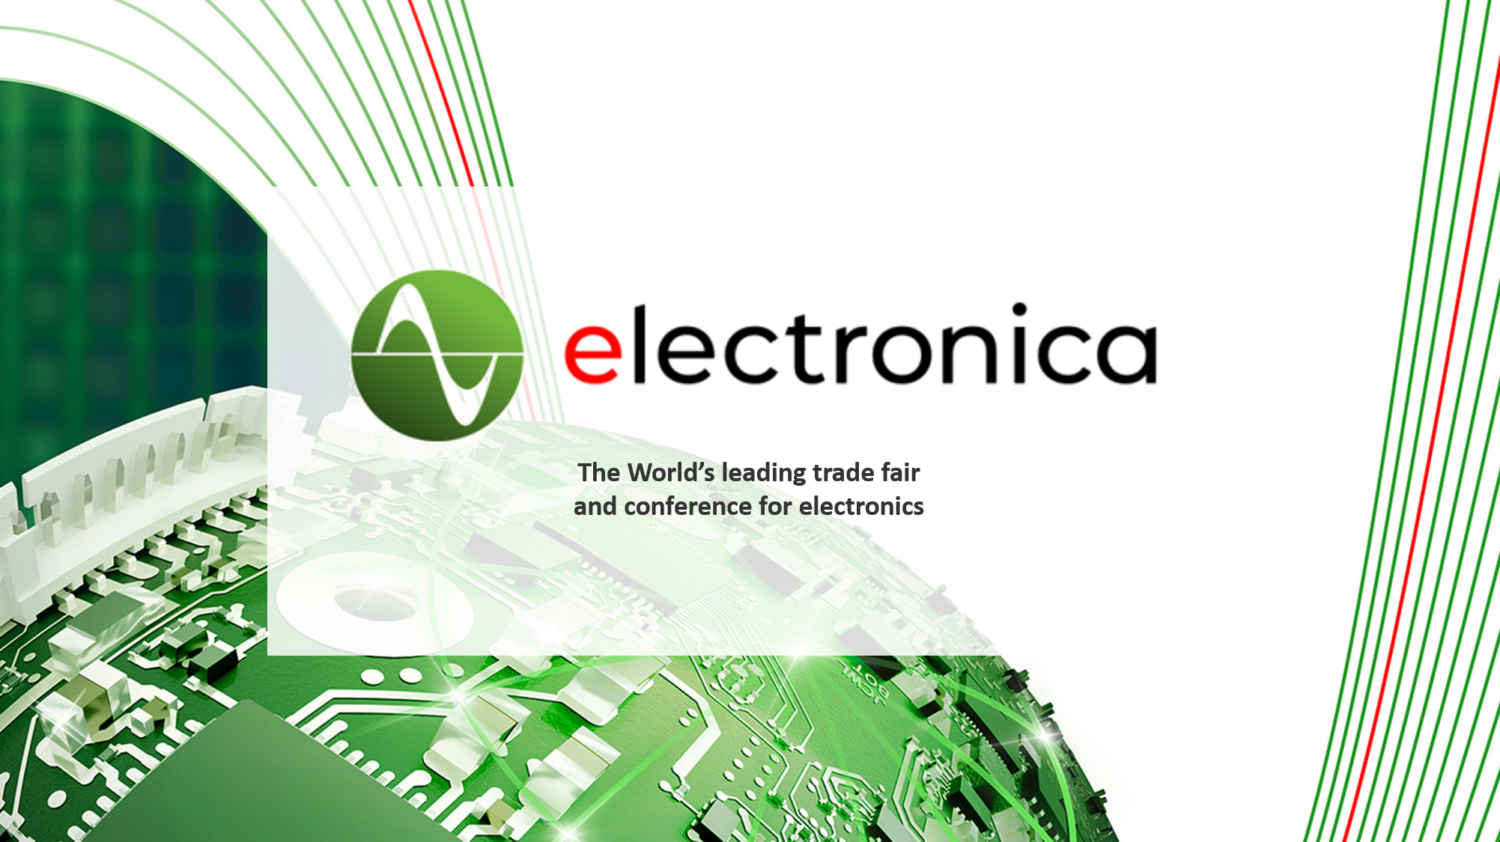 electronica_header-1500x842